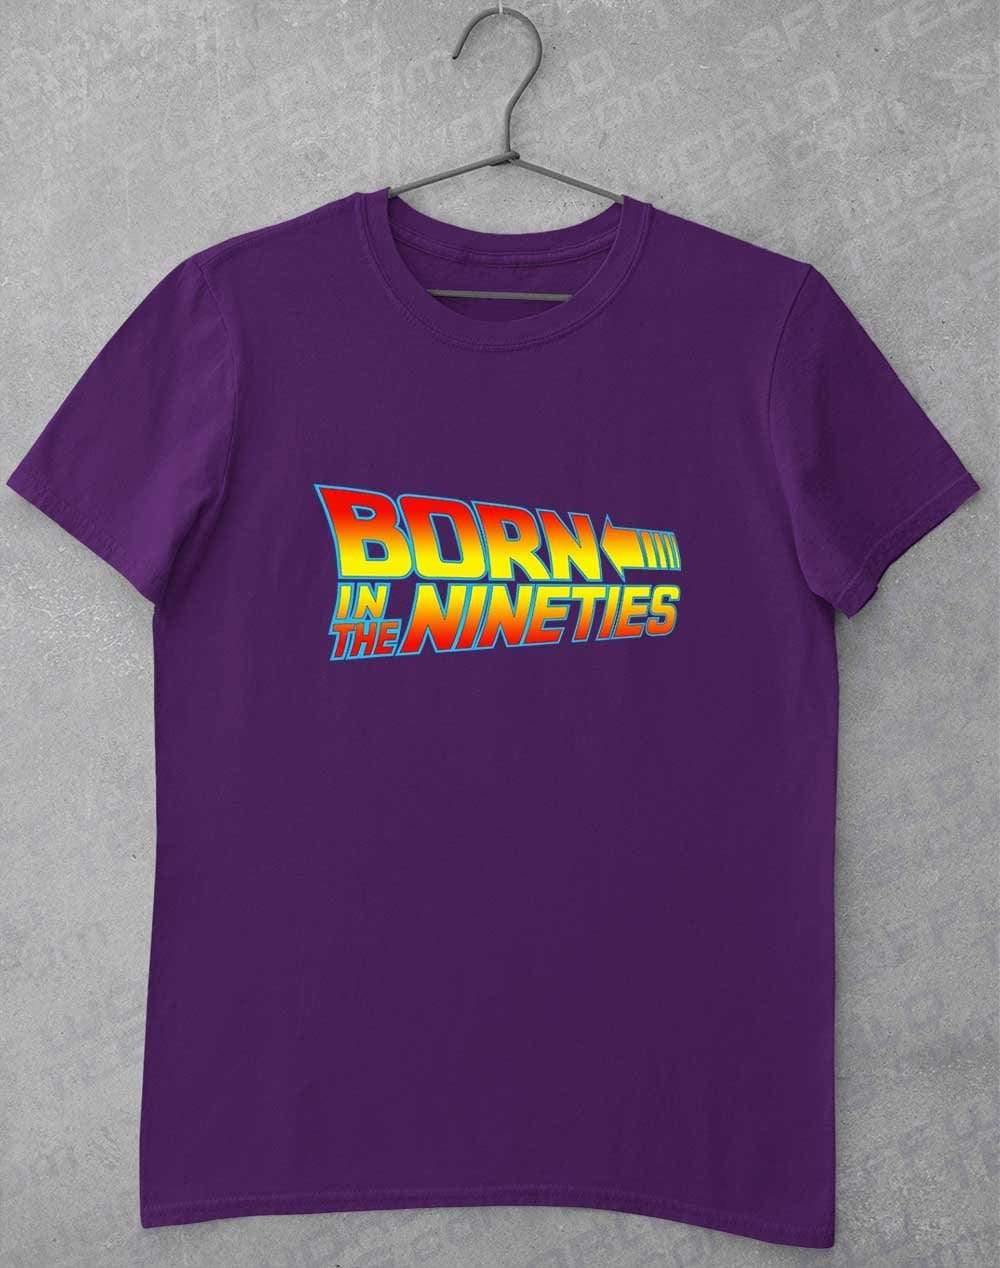 Born in the... (CHOOSE YOUR DECADE!) T-shirt THE NINETIES - Purple / S  - Off World Tees